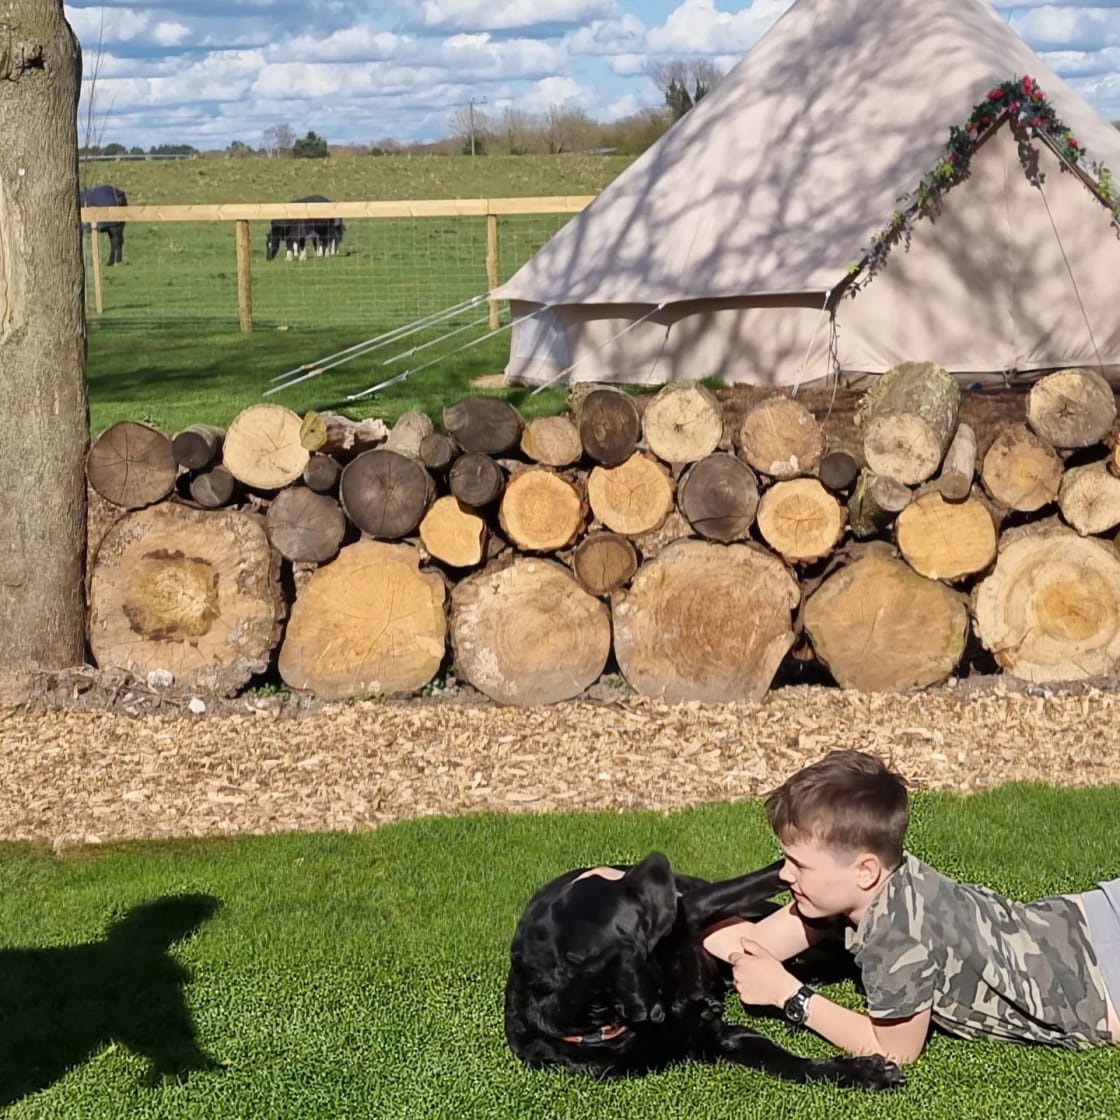 Willow Grove Farm Glamping